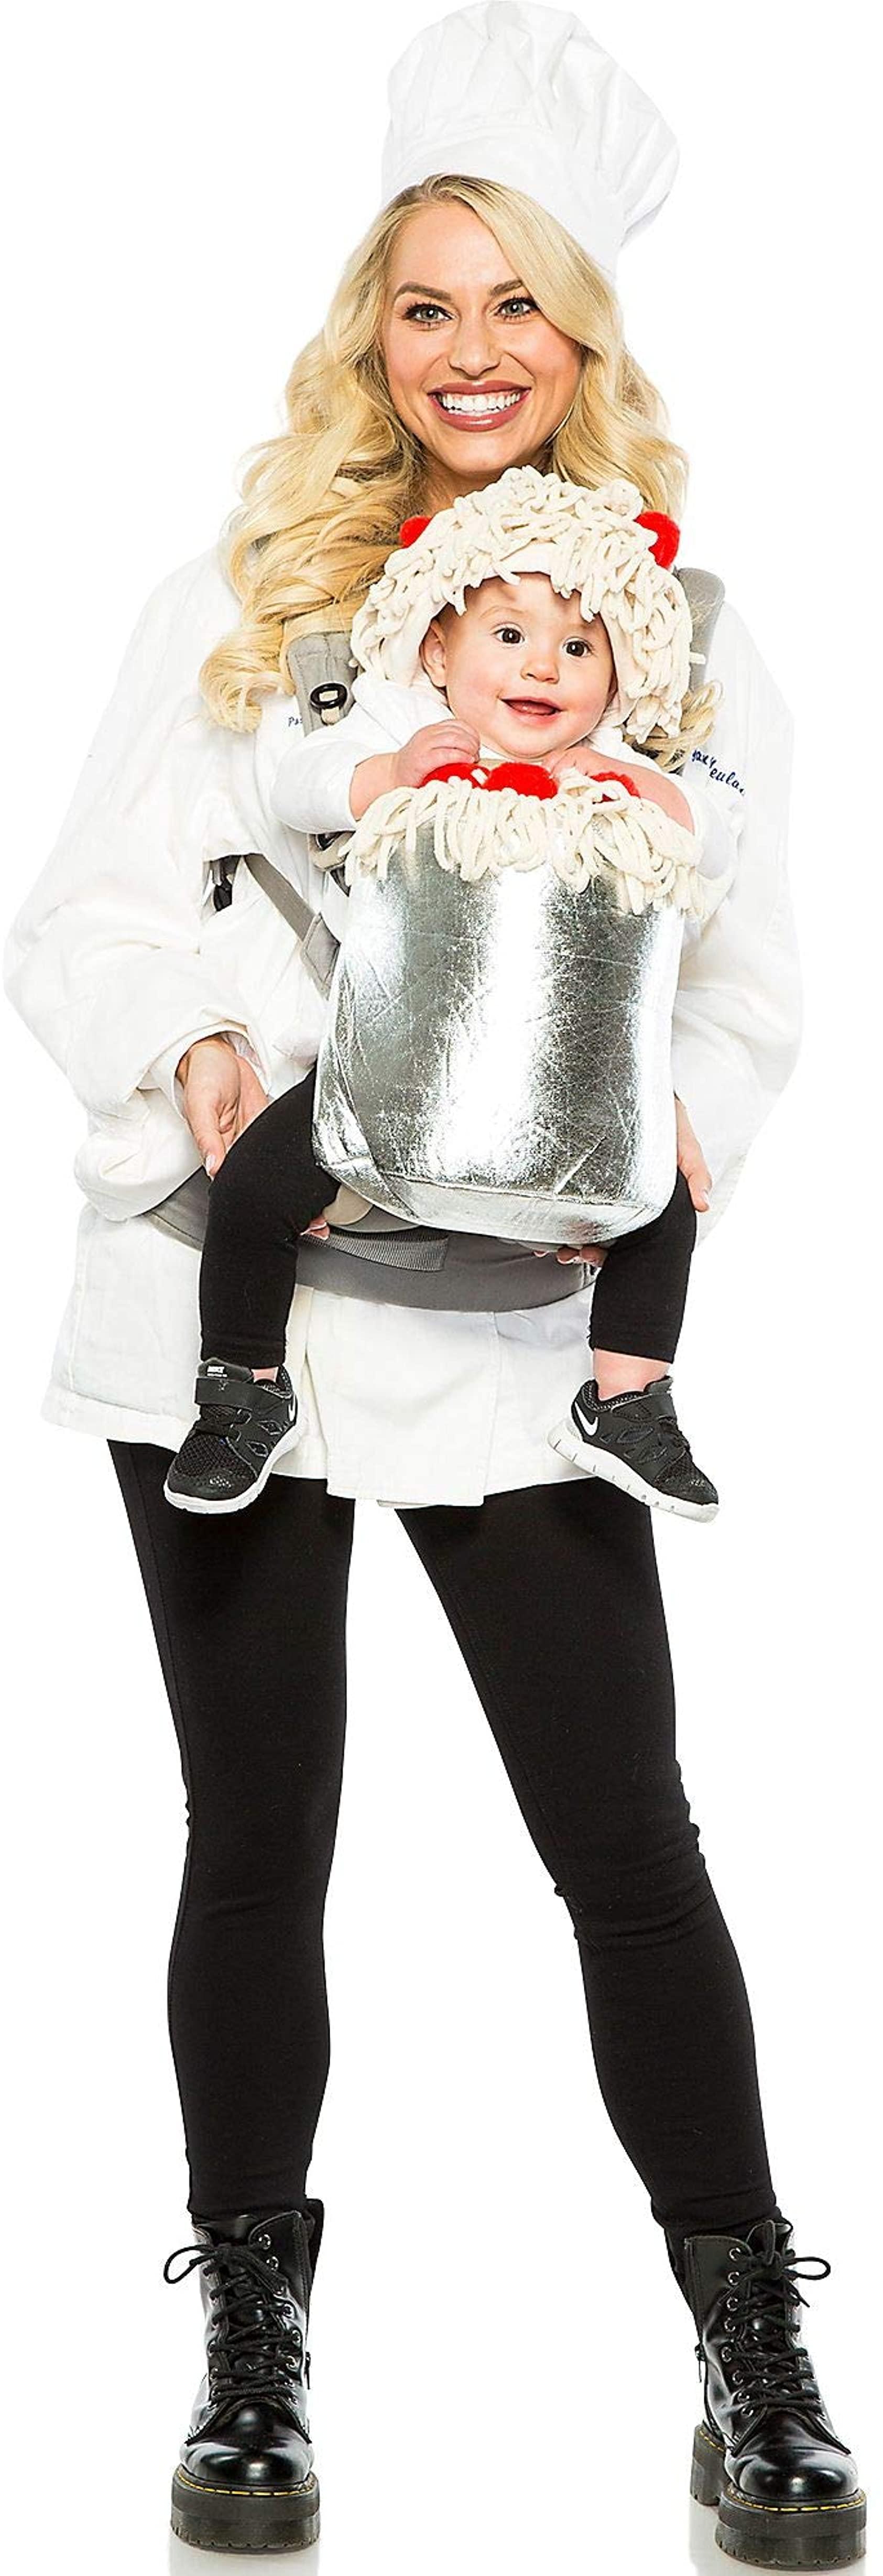 Chef & Spaghetti Costume for Parent & Baby | One Size Fits Most